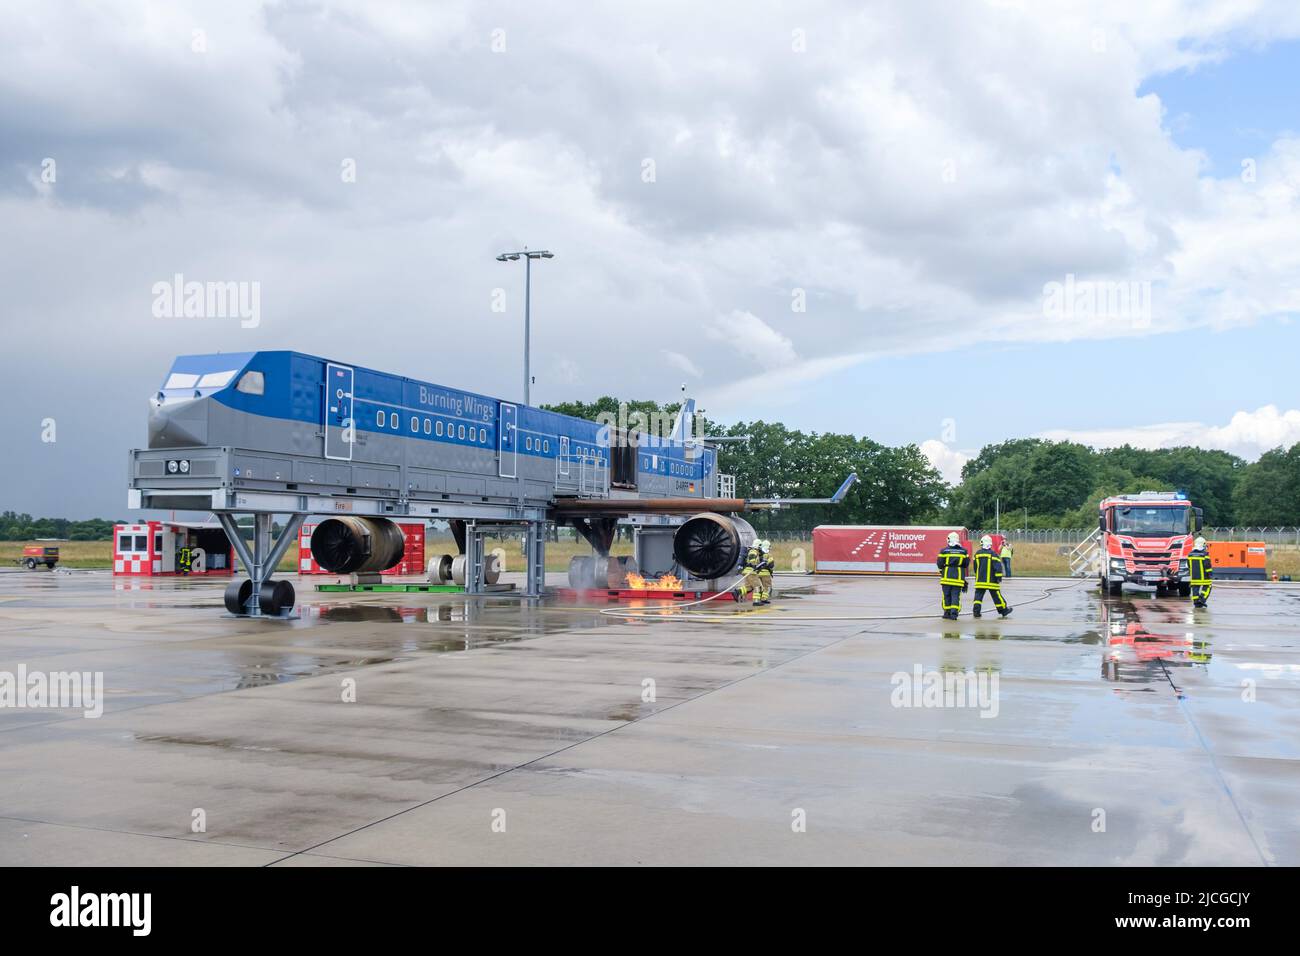 Langenhagen, Germany. 13th June, 2022. Airport firefighters extinguish a turbine fire at Hanover Airport during an exercise at the mobile fire simulation facility. The facility is a joint project of Hannover, Stuttgart and Bremen airports and is intended to serve the training and exercise of airport firefighters. Credit: Ole Spata/dpa/Alamy Live News Stock Photo